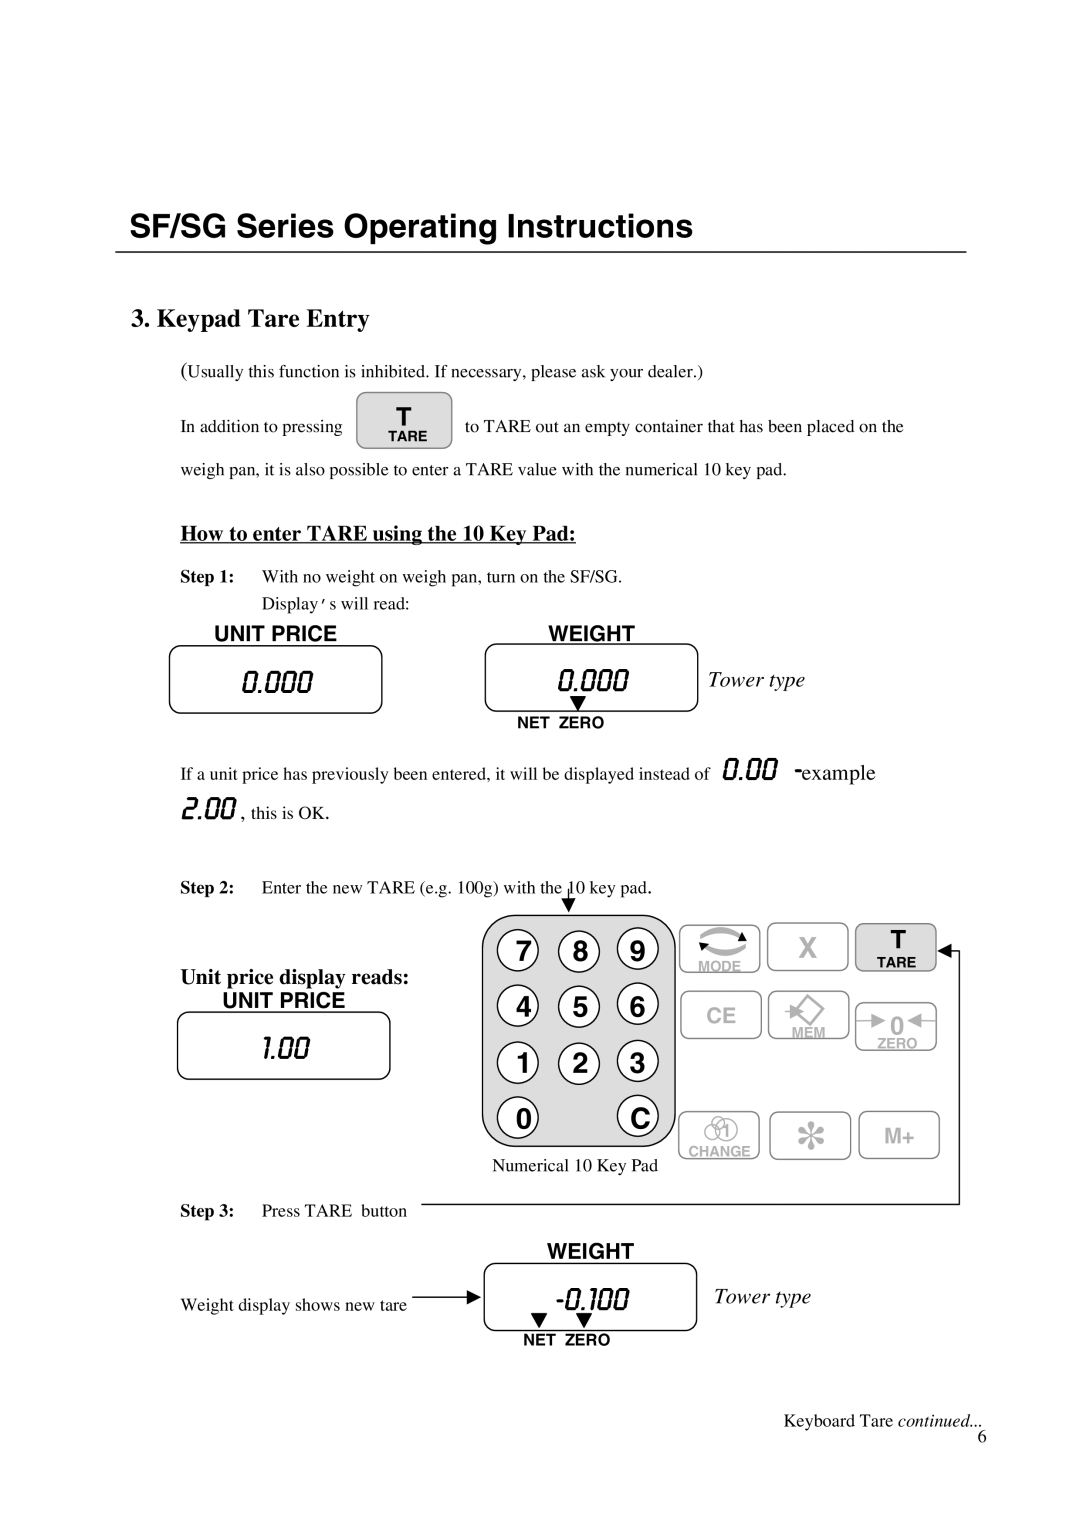 A&D SF/SG 1.00, Keypad Tare Entry, How to enter TARE using the 10 Key Pad, Weight, Unit price display reads, Unit Price 